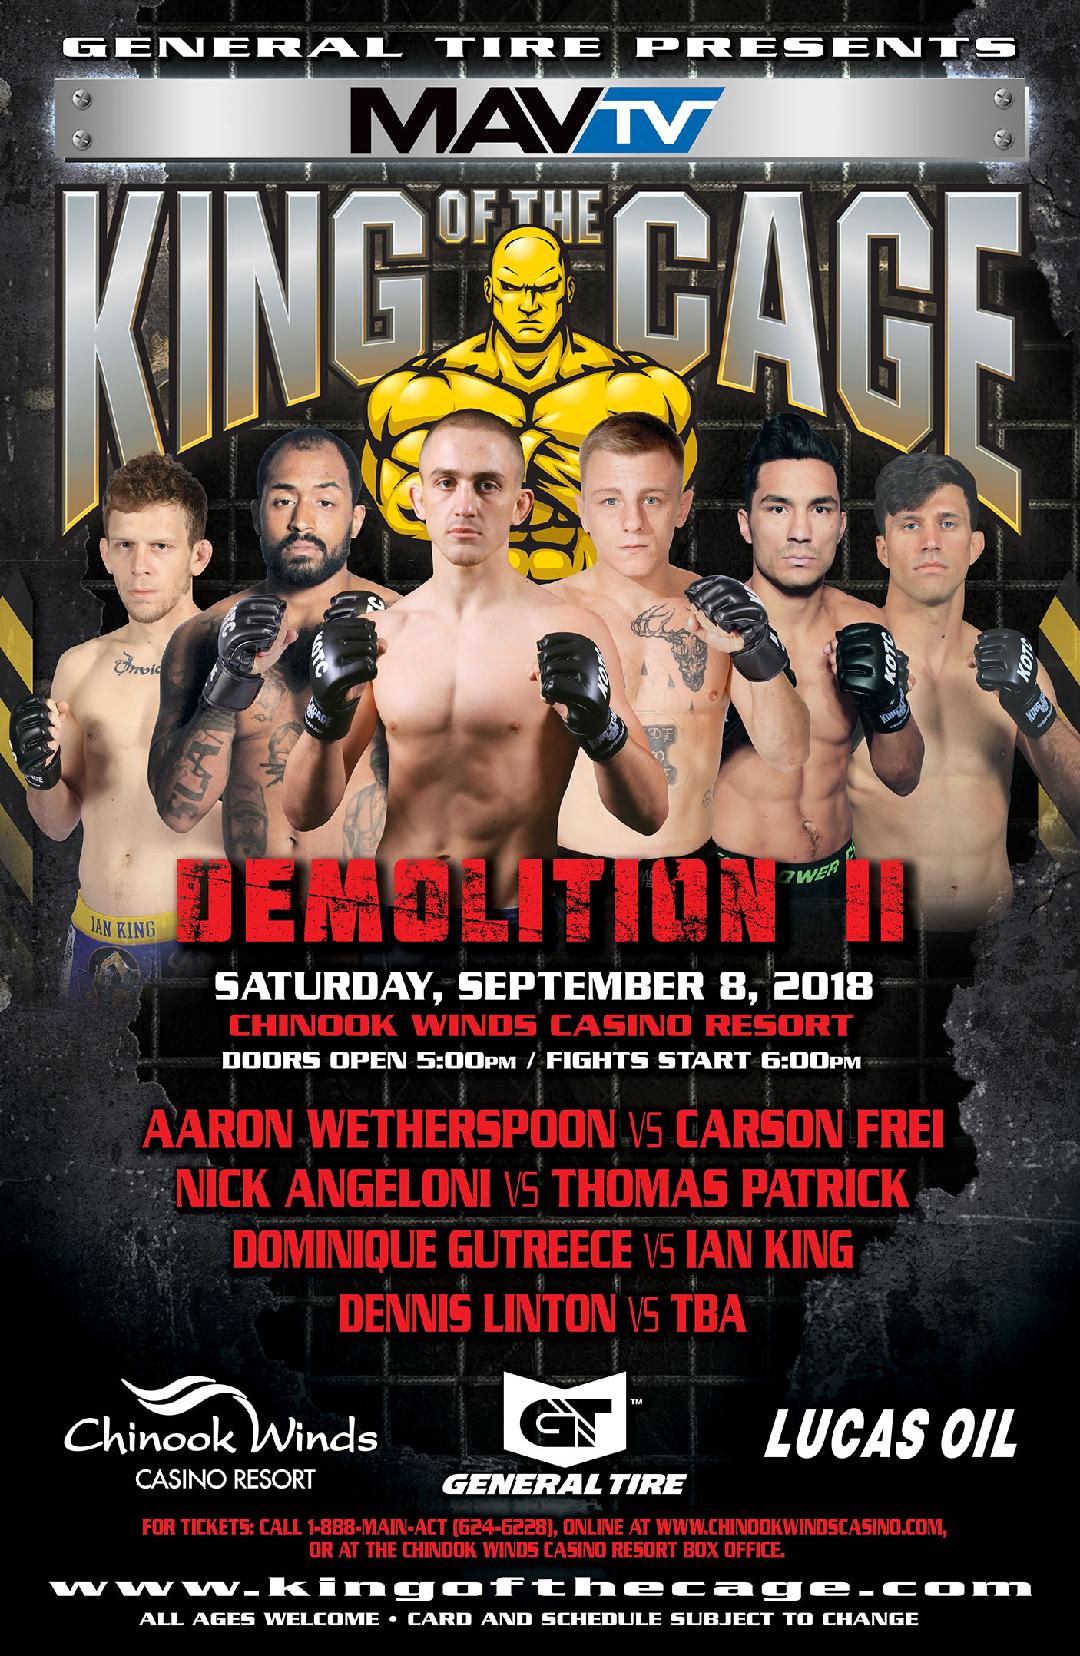 King of the Cage Announces Main Fight Card For Chinook Winds Casino Resort on September 8 for “DEMOLITION II”